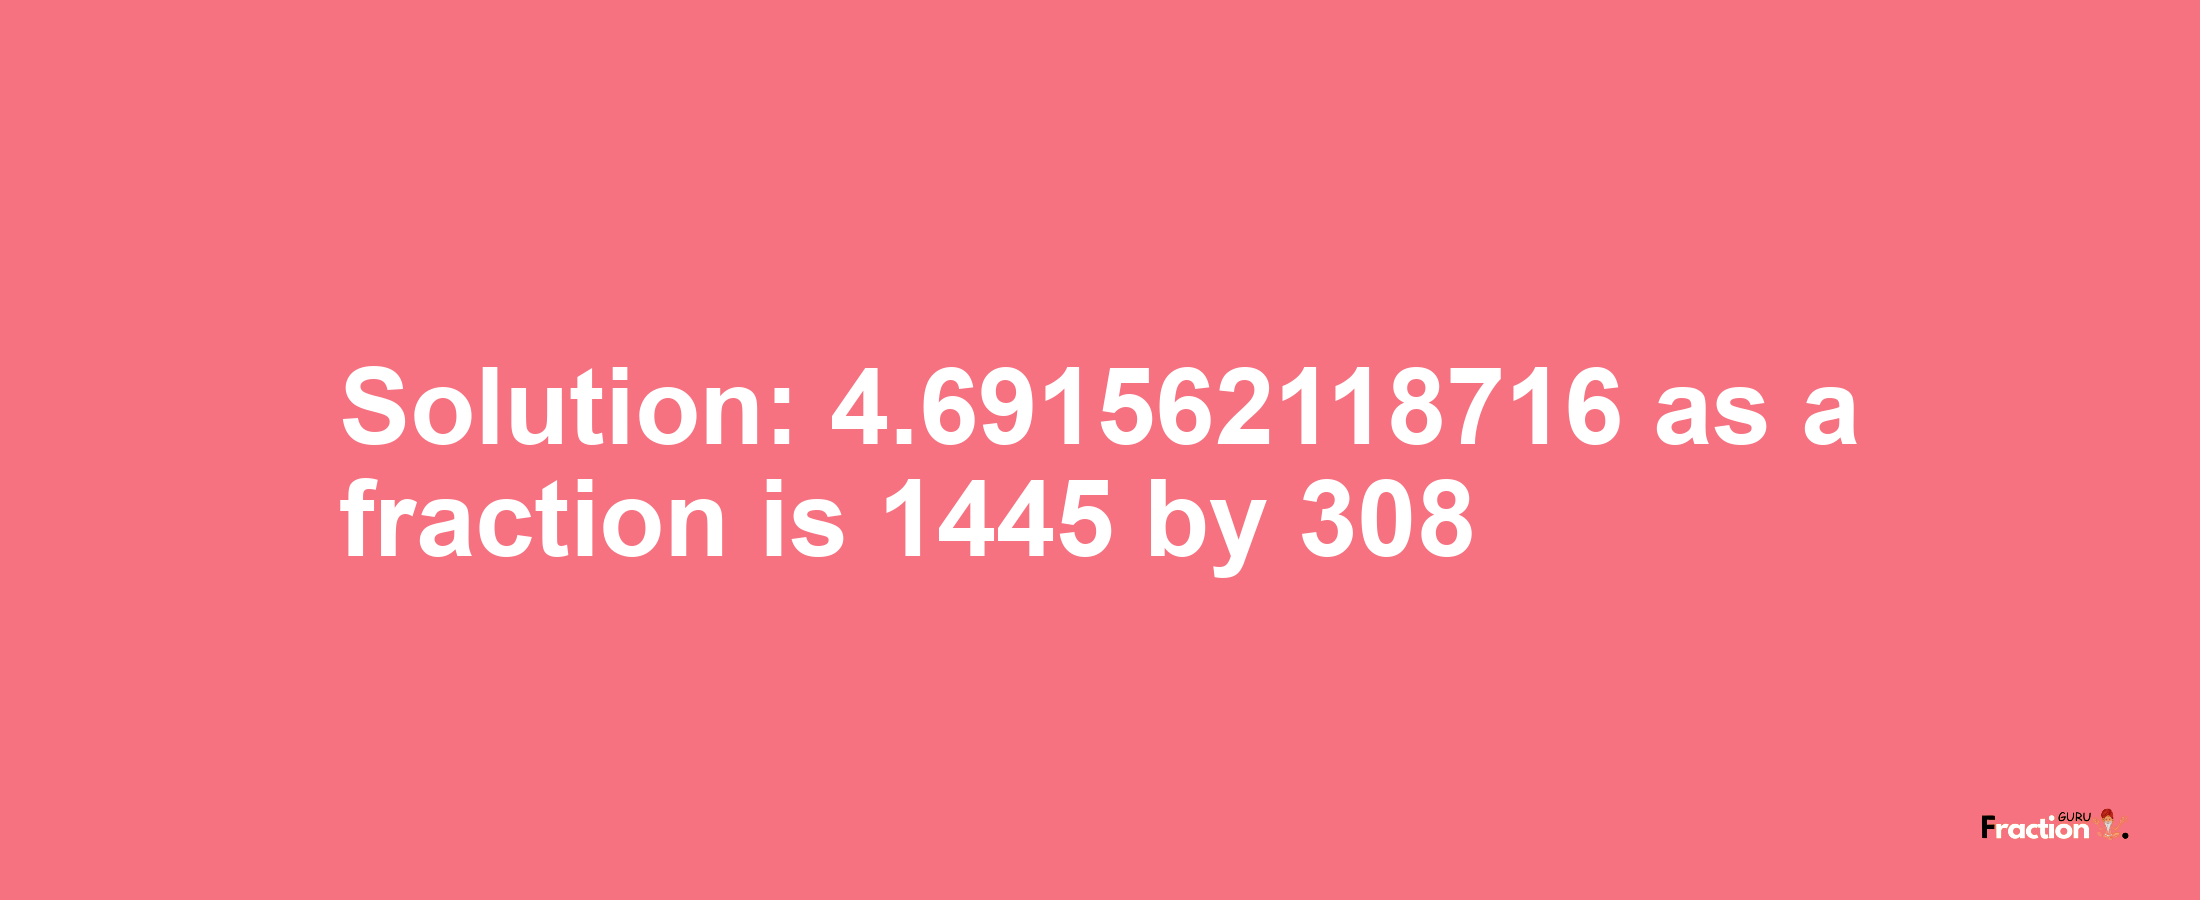 Solution:4.691562118716 as a fraction is 1445/308